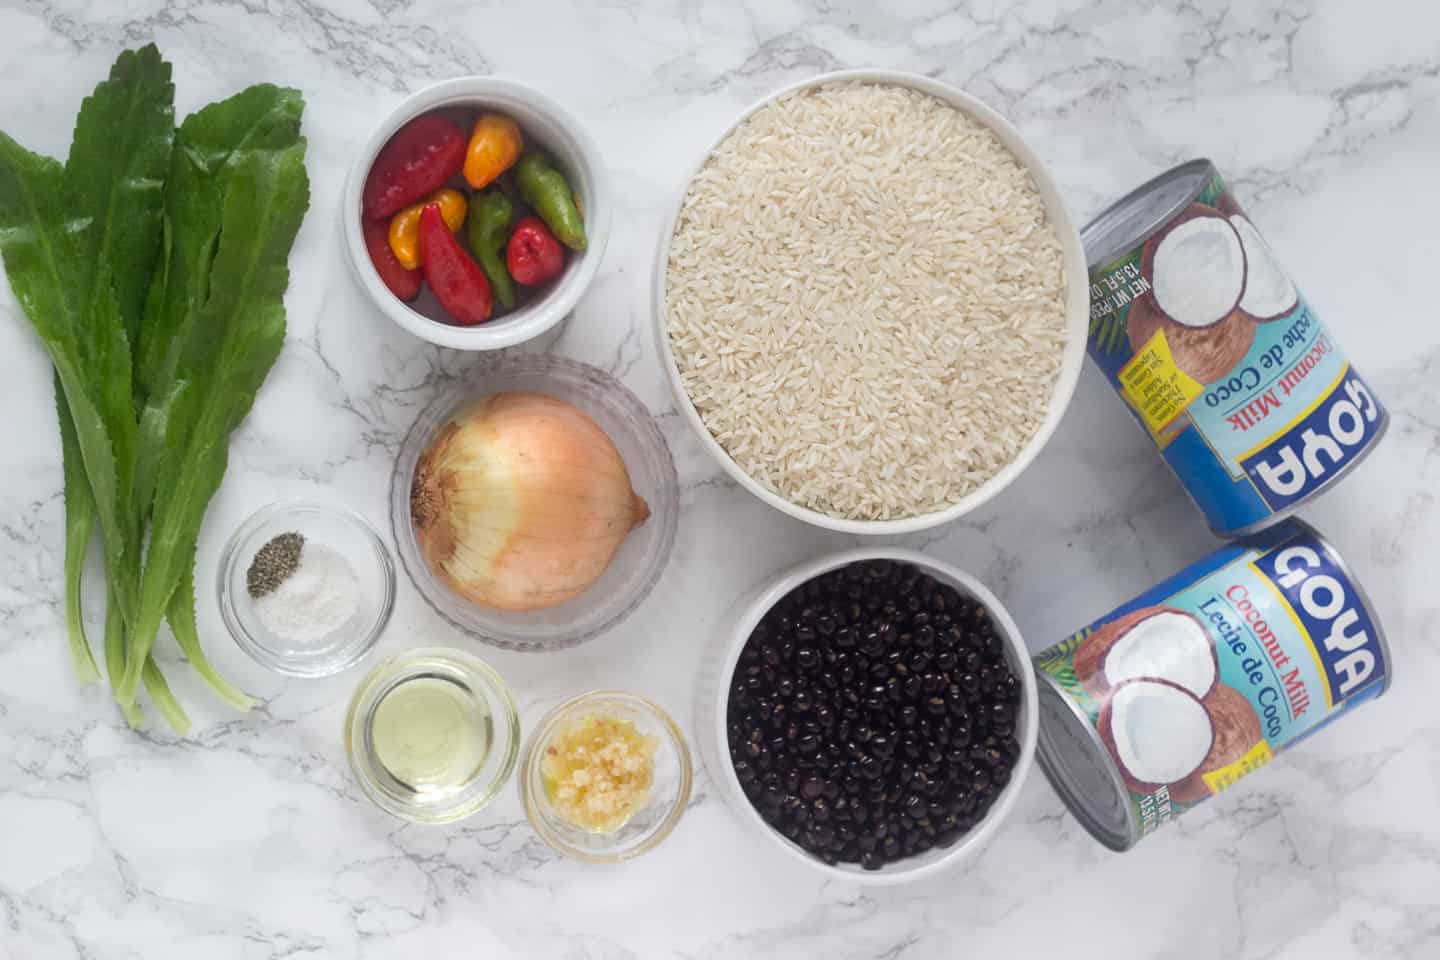 Ingredients for the rice with pigeon peas and coconut: rice, sweet peppers, culantro leaves, yellow onion, garlic, salt, black pepper, pigeon peas and 2 cans of coconut milk.